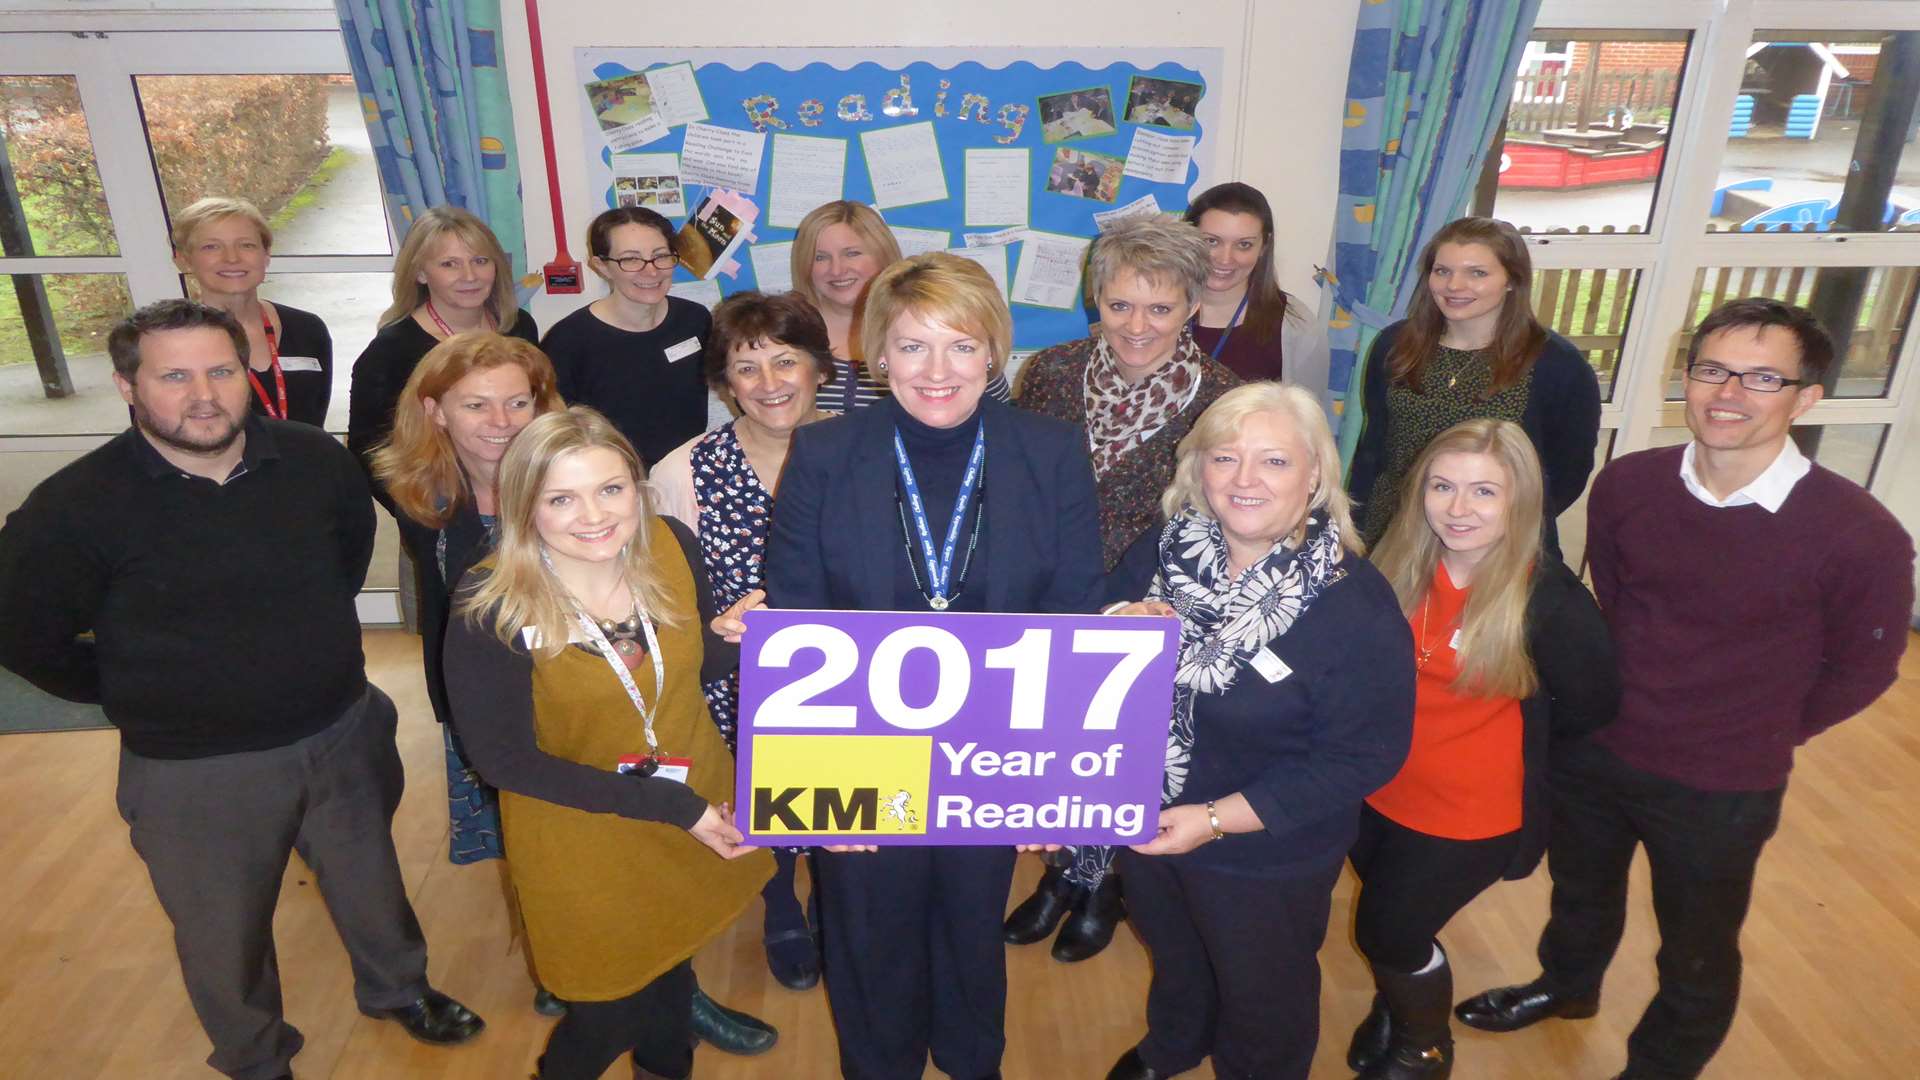 Mrs Ashley Crittenden, head teacher of West Borough Primary School (centre) joins Maidstone schools to launch KM's Year of Reading.